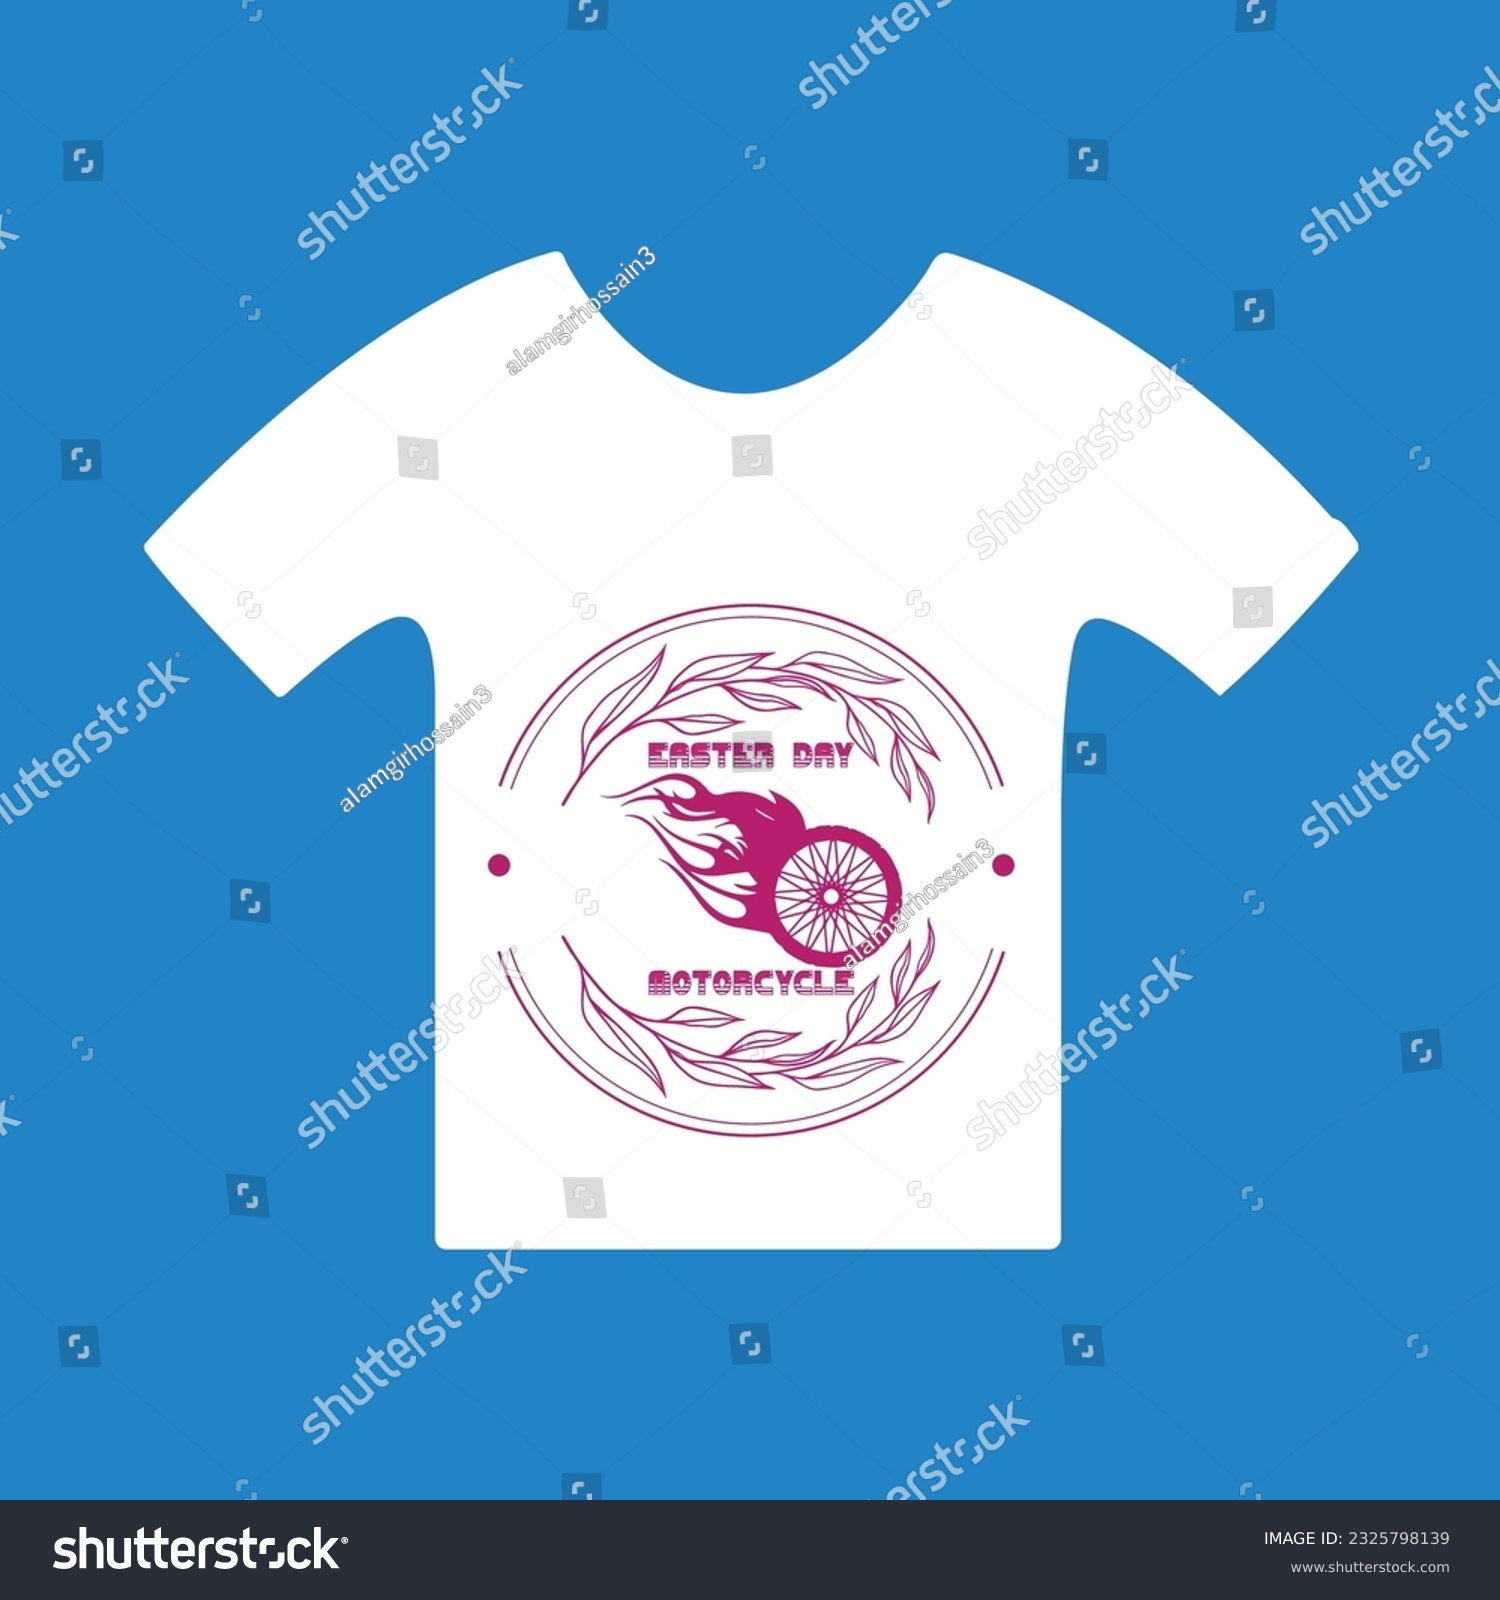 SVG of Easter day motorcycle 1 t-shirt design. Here You Can find and Buy t-Shirt Design. Digital Files for yourself, friends and family, or anyone who supports your Special Day and Occasions. svg